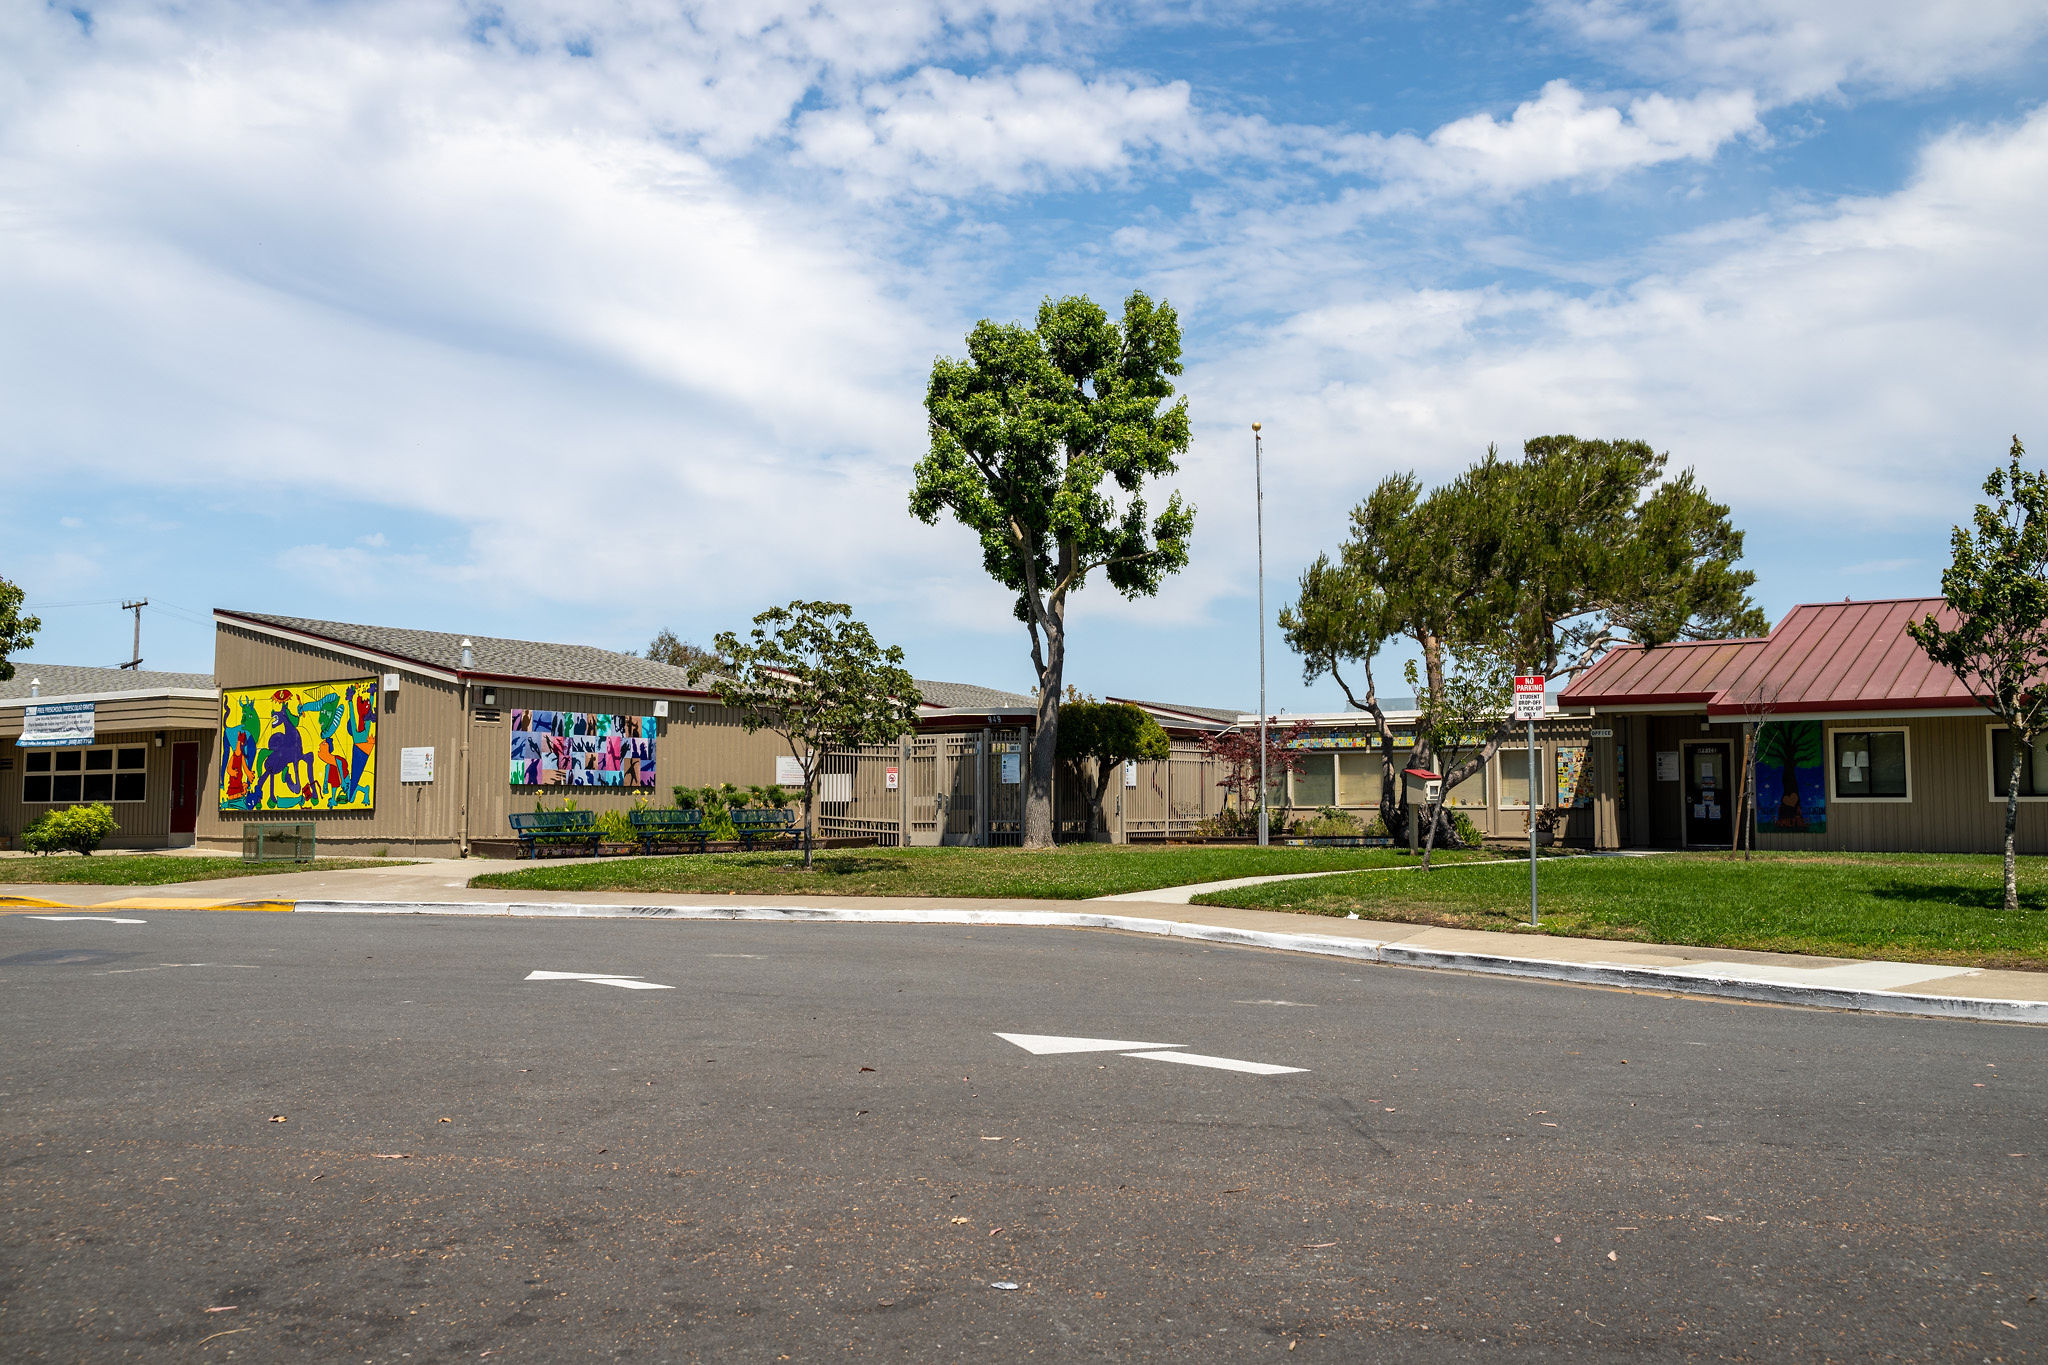 School in the Shoreview area in San Mateo